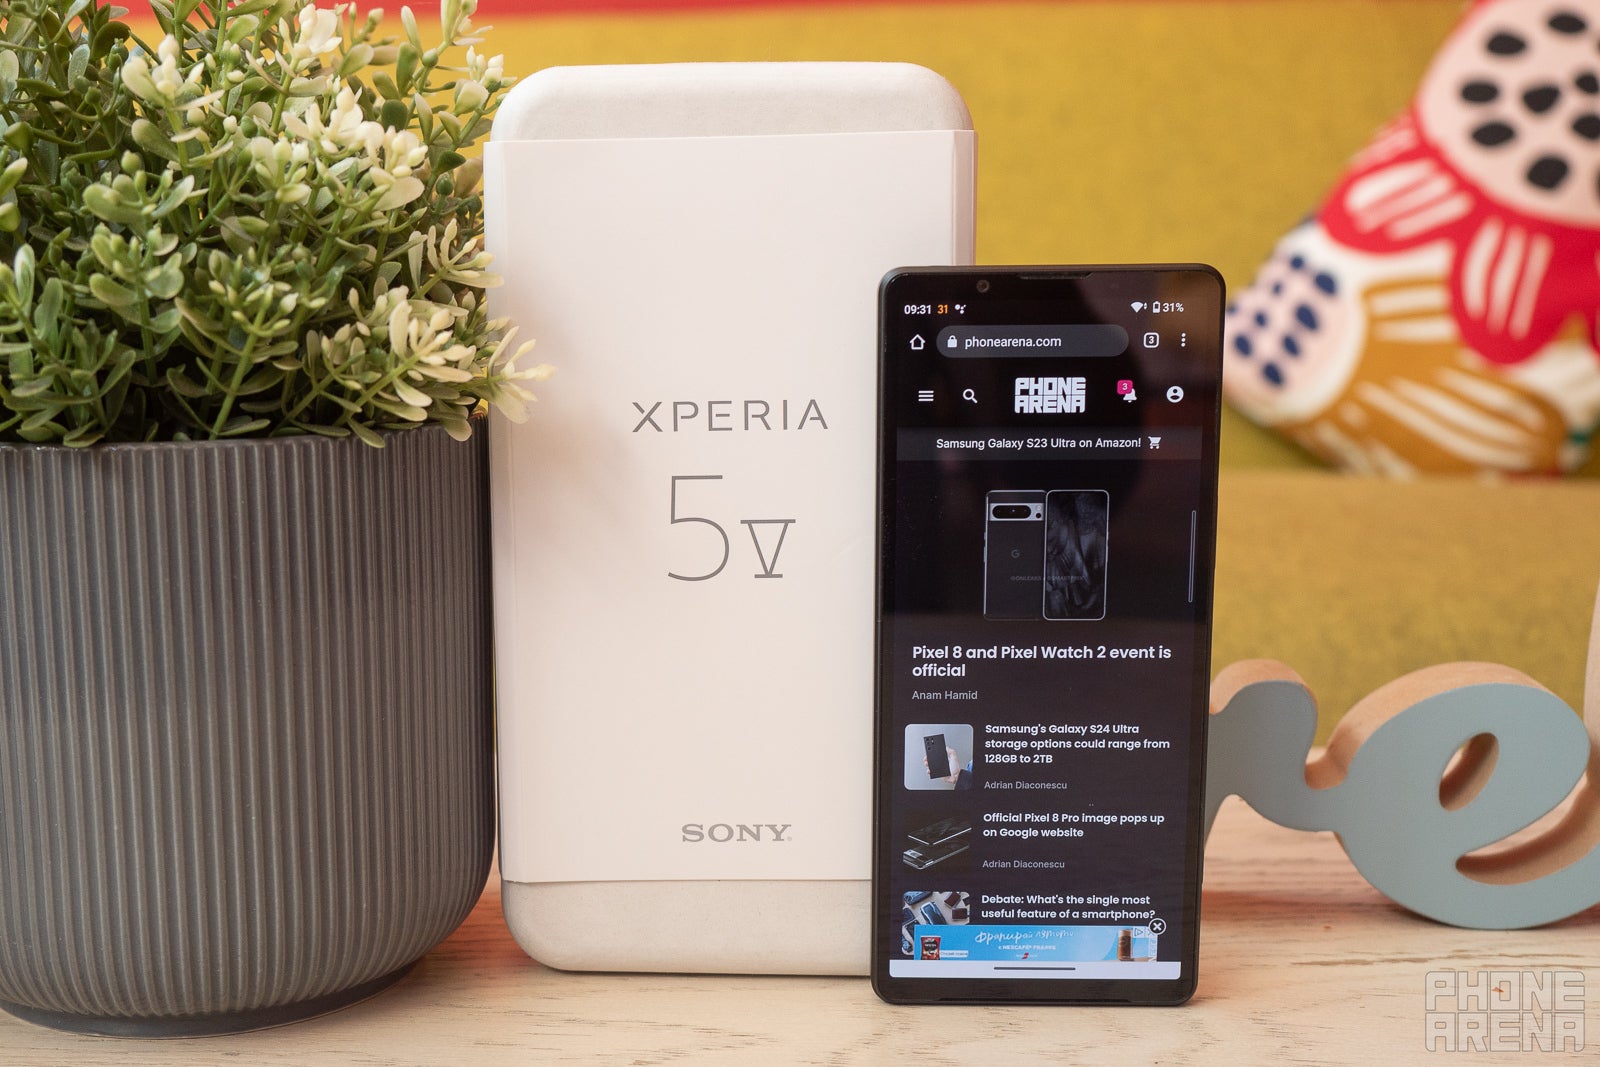 Sony's Xperia 5 V phone comes with a flagship 52-megapixel sensor